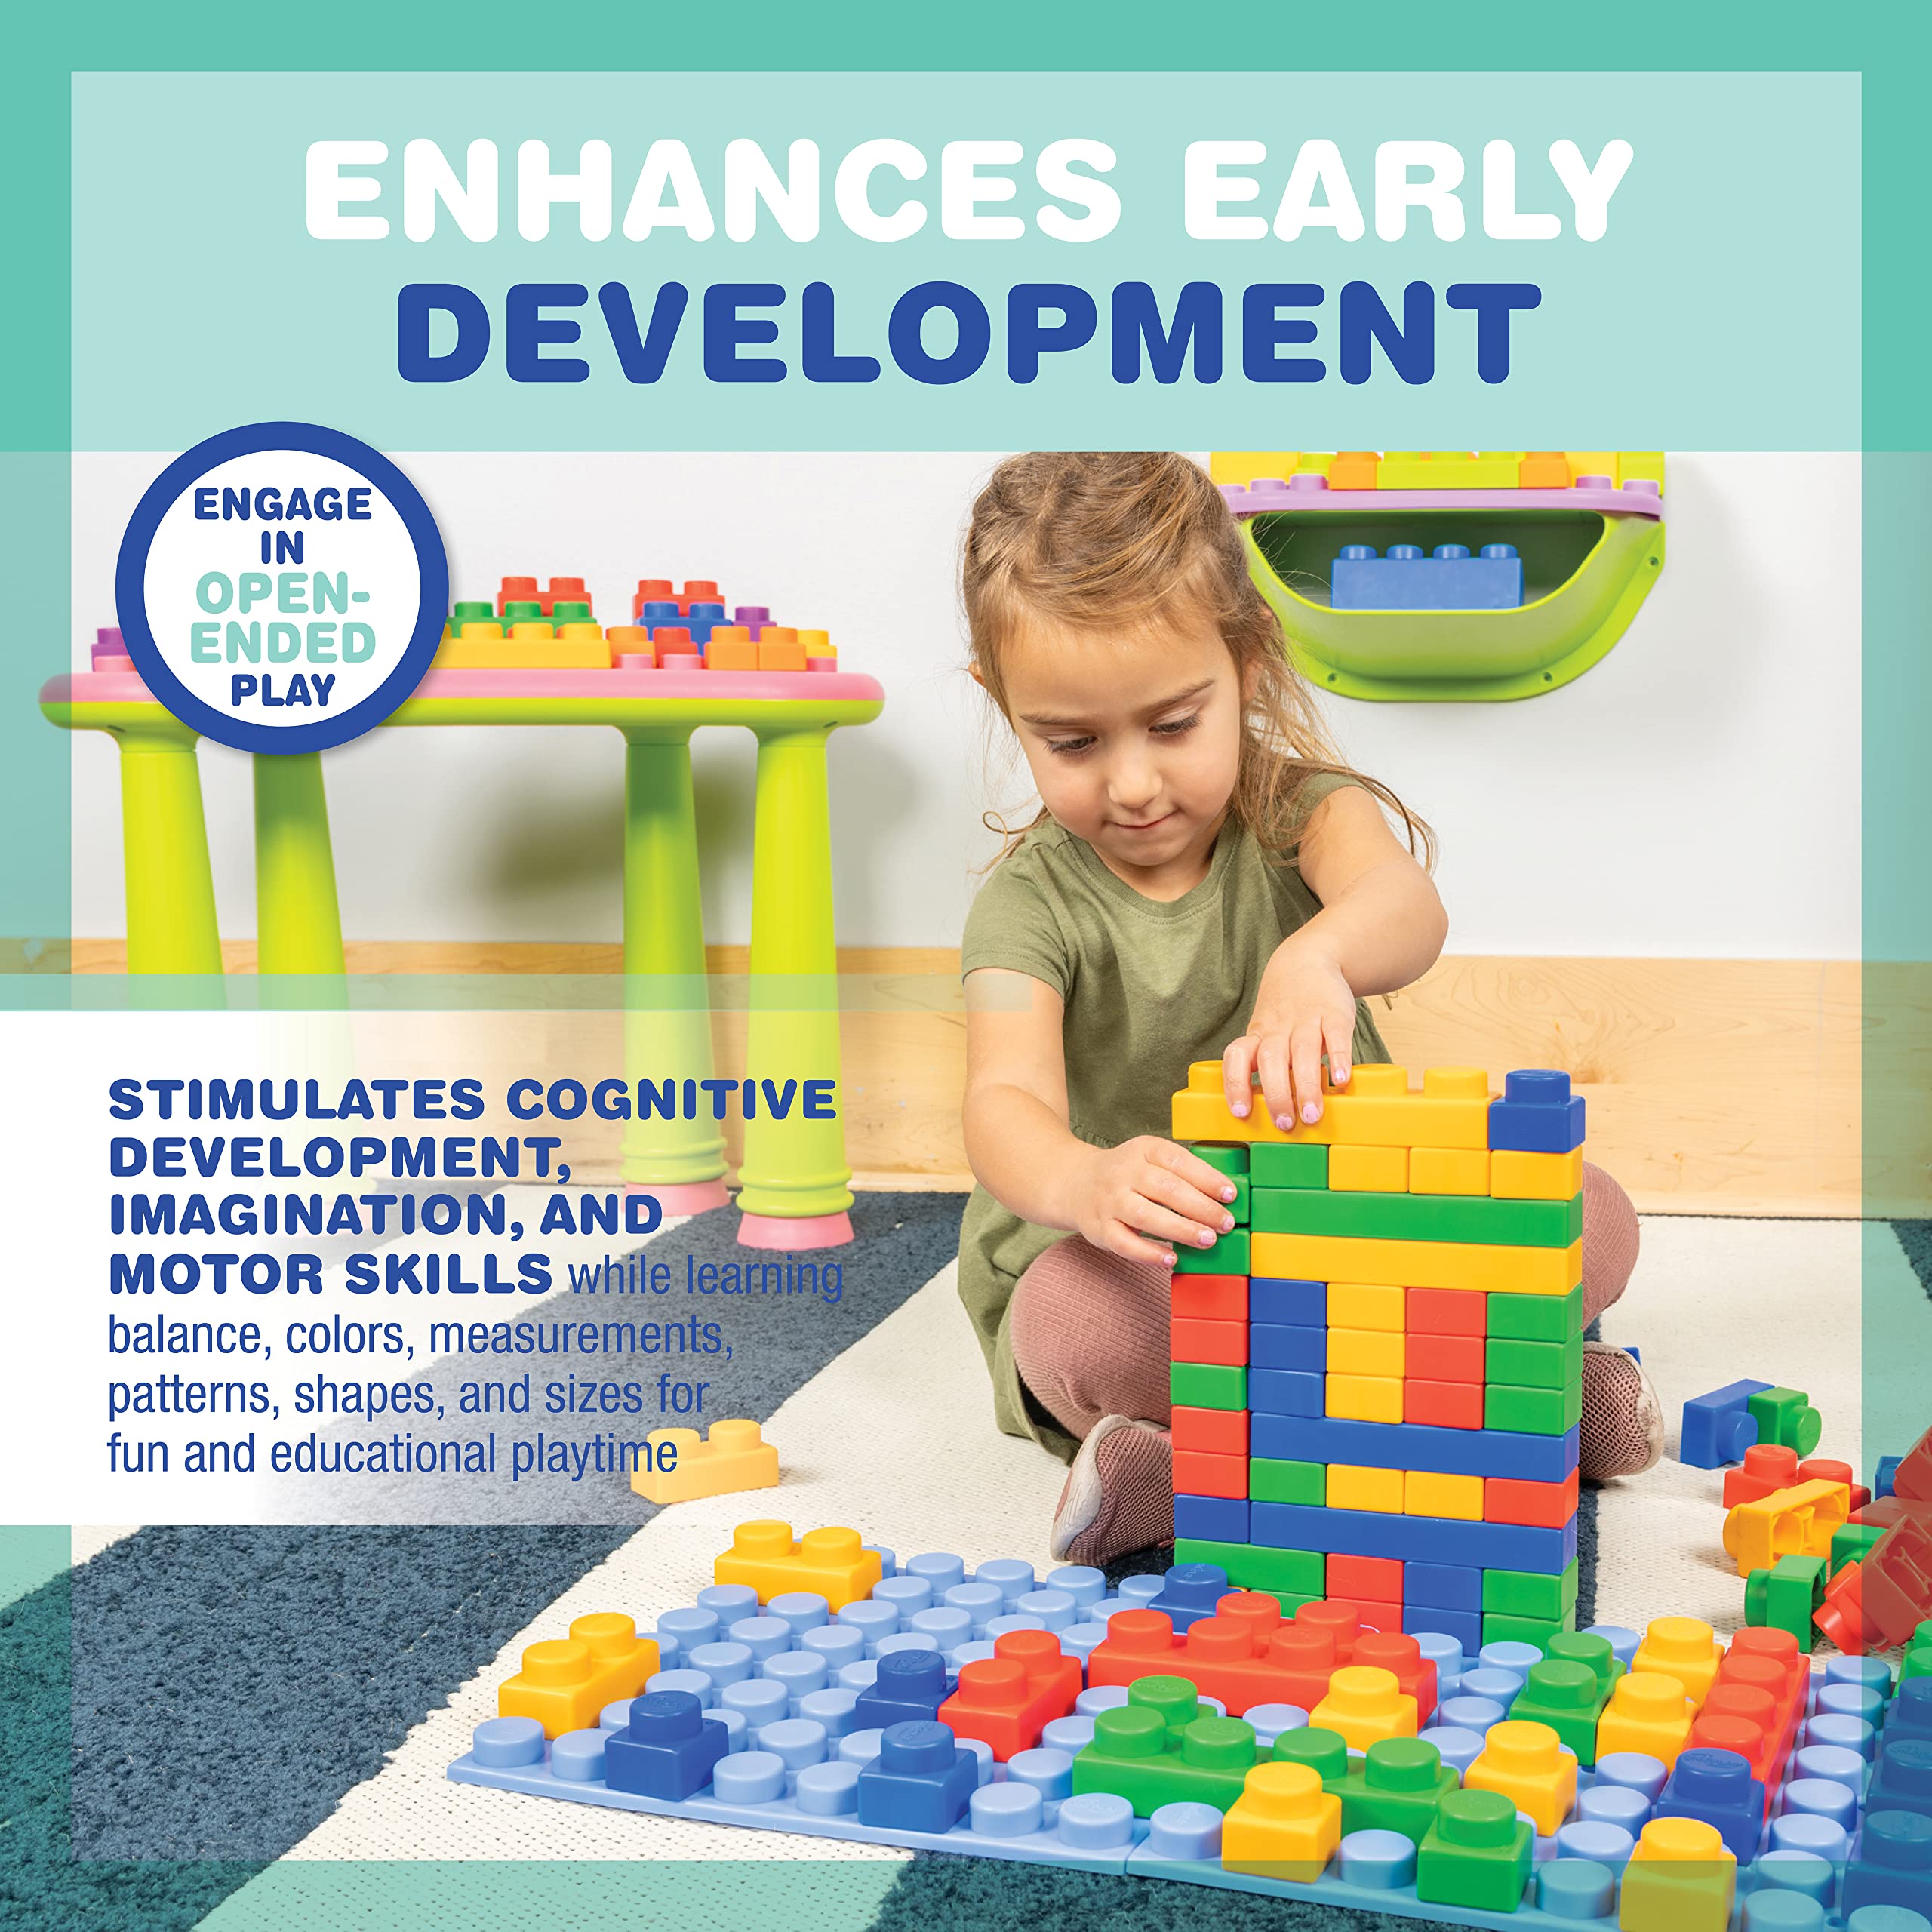 UNiPLAY Platform Soft Building Blocks — Educational Sensory Stacking Blocks, Learning Toy with Four 11 x 11 Inch Base Plates for Ages 3 Months and Up (124-Piece Set)